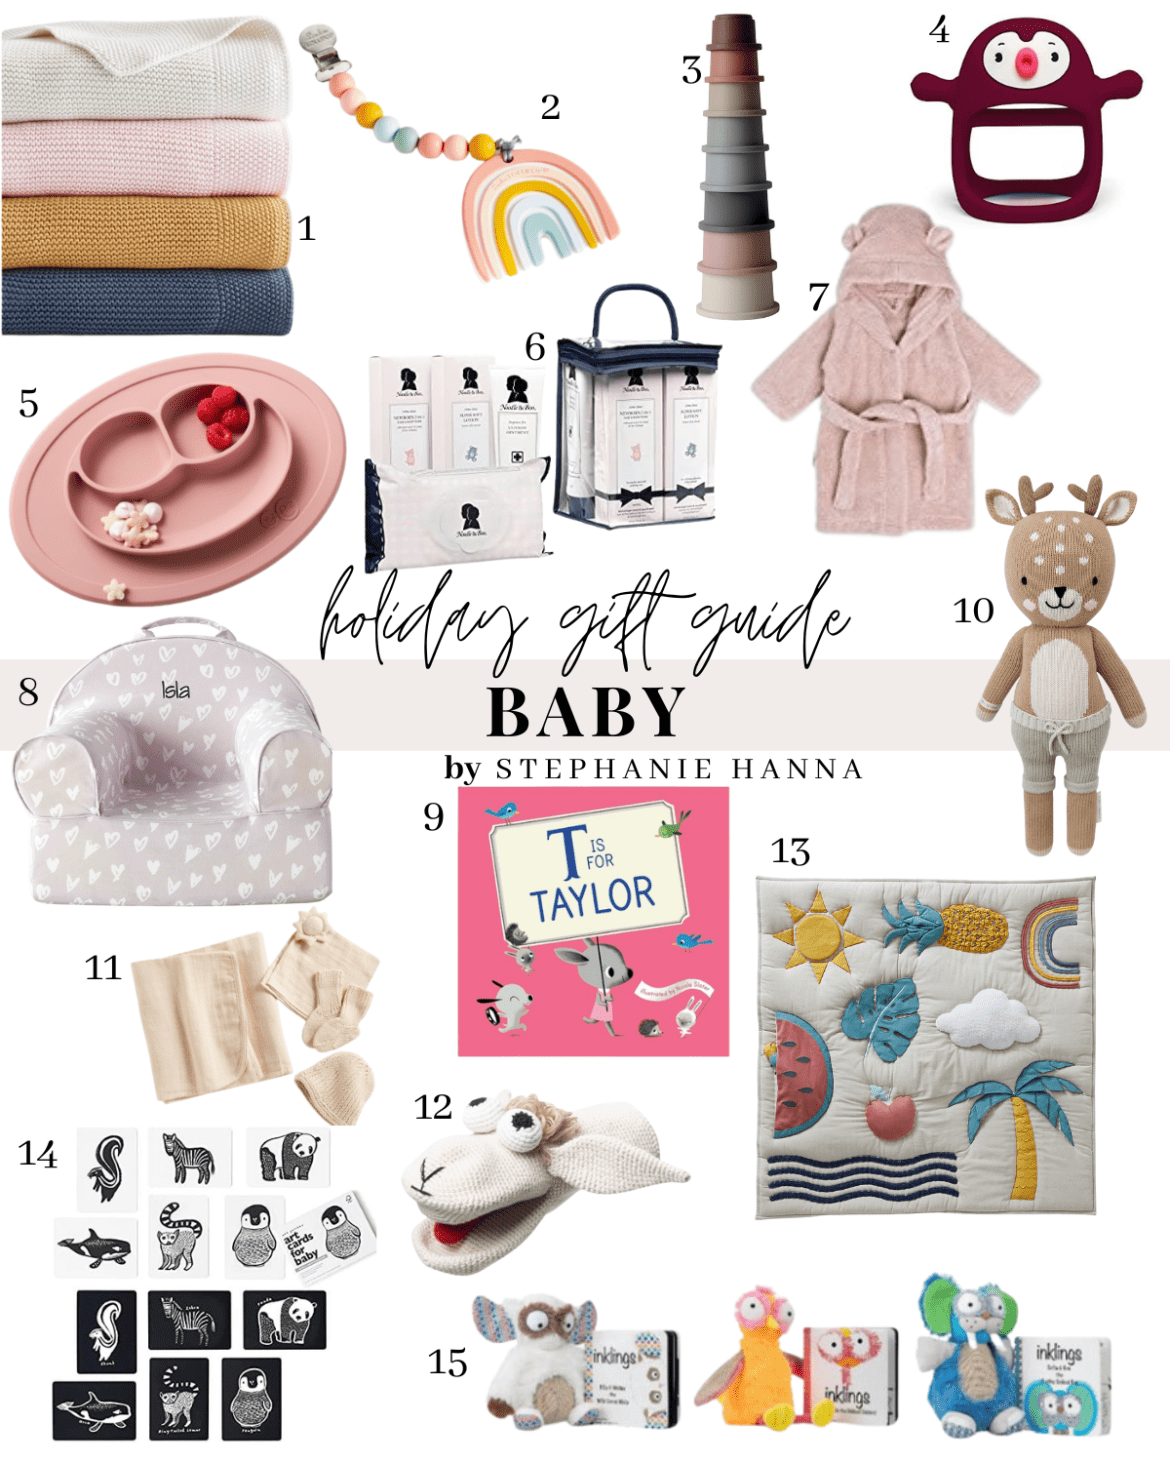 Gift Guide for Babies